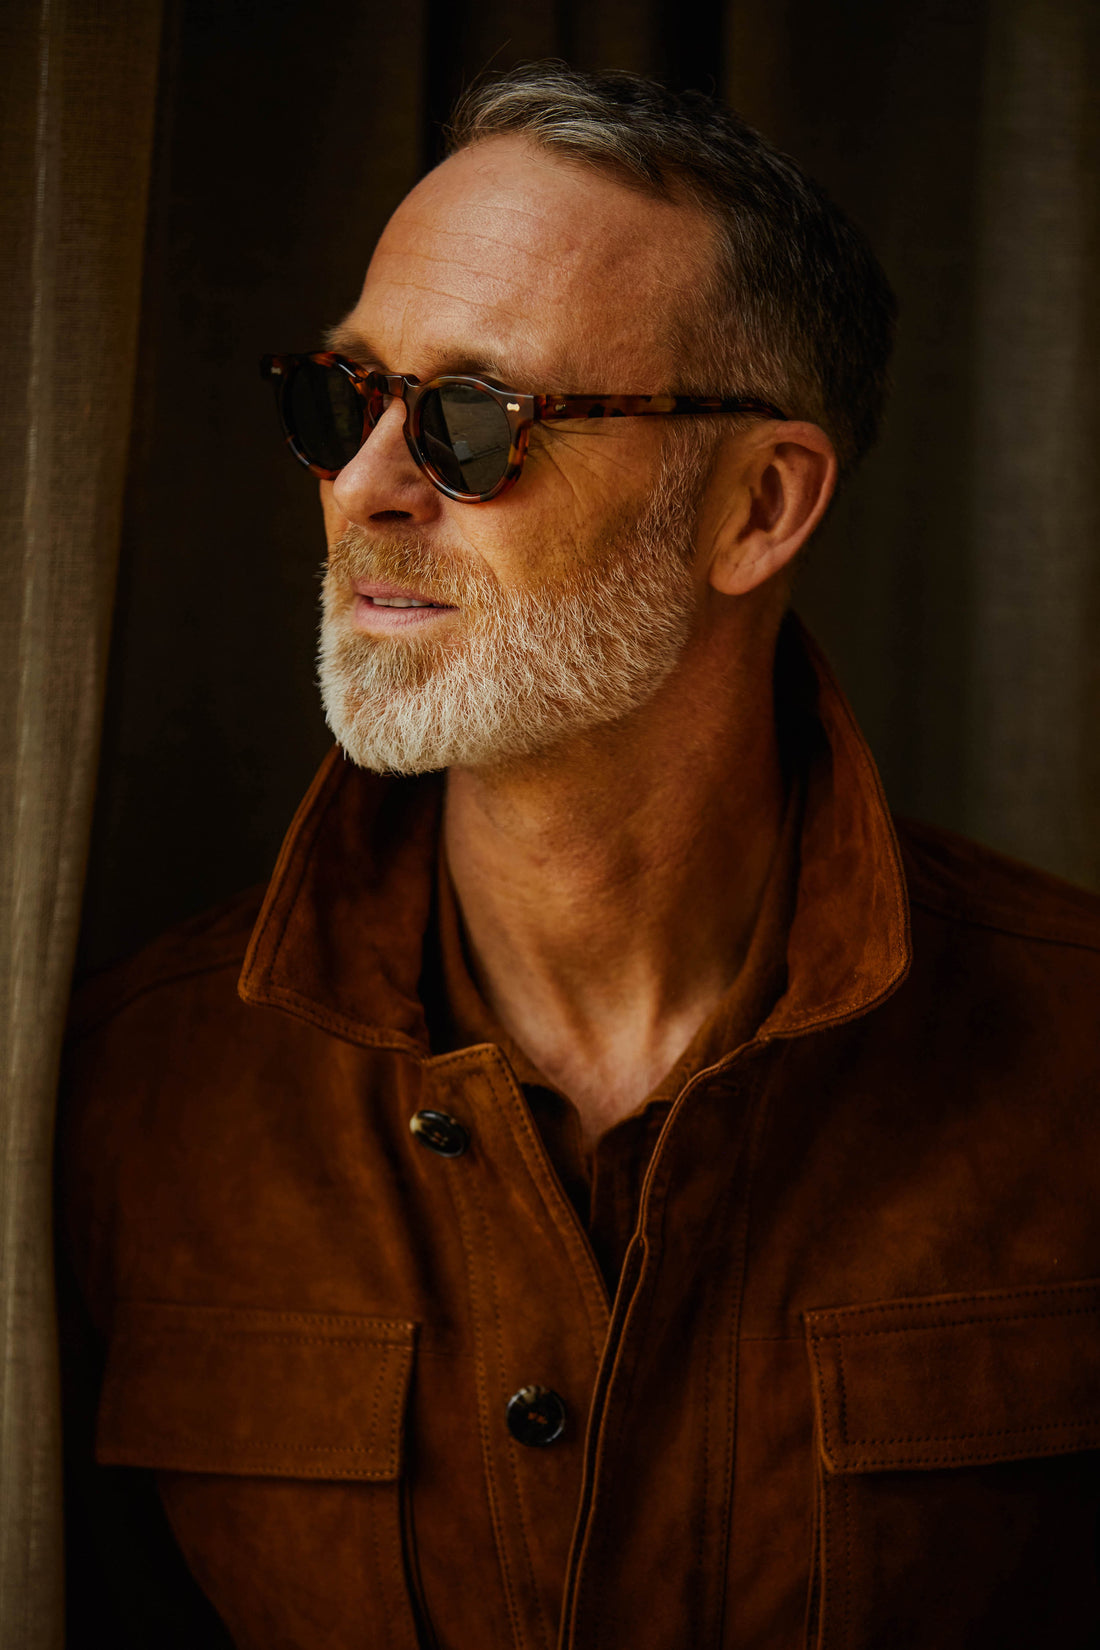 Mature man in sunglasses and brown jacket looking away thoughtfully.